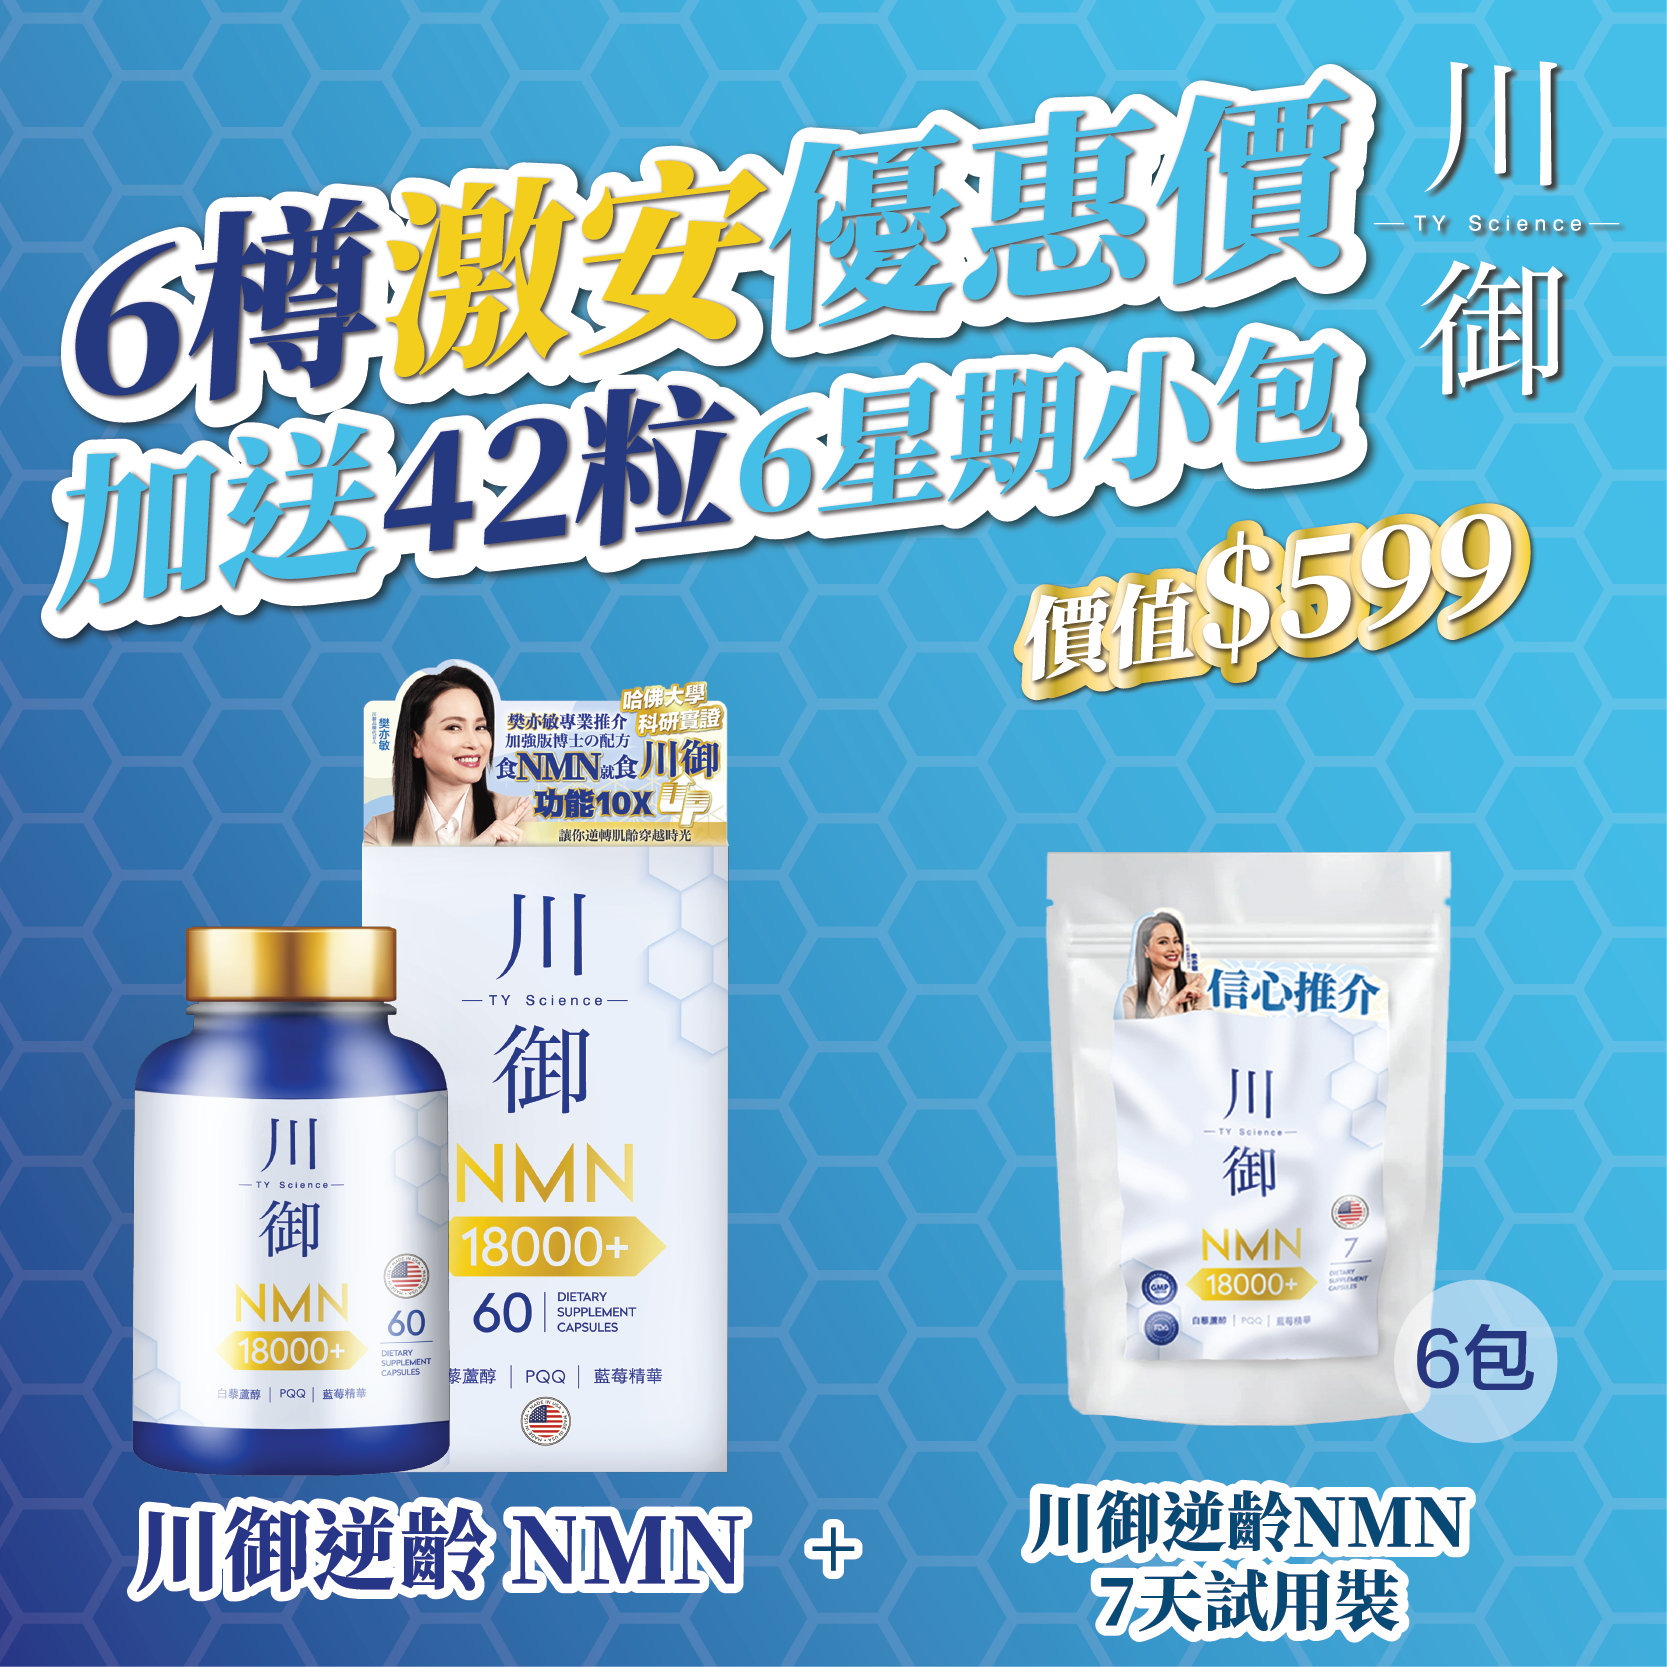 Sichuanyu enhanced version of NMN allows you to travel through time and delay aging. Produced in a GMP factory in the United States (upgraded version) recommended by Fan Yimin